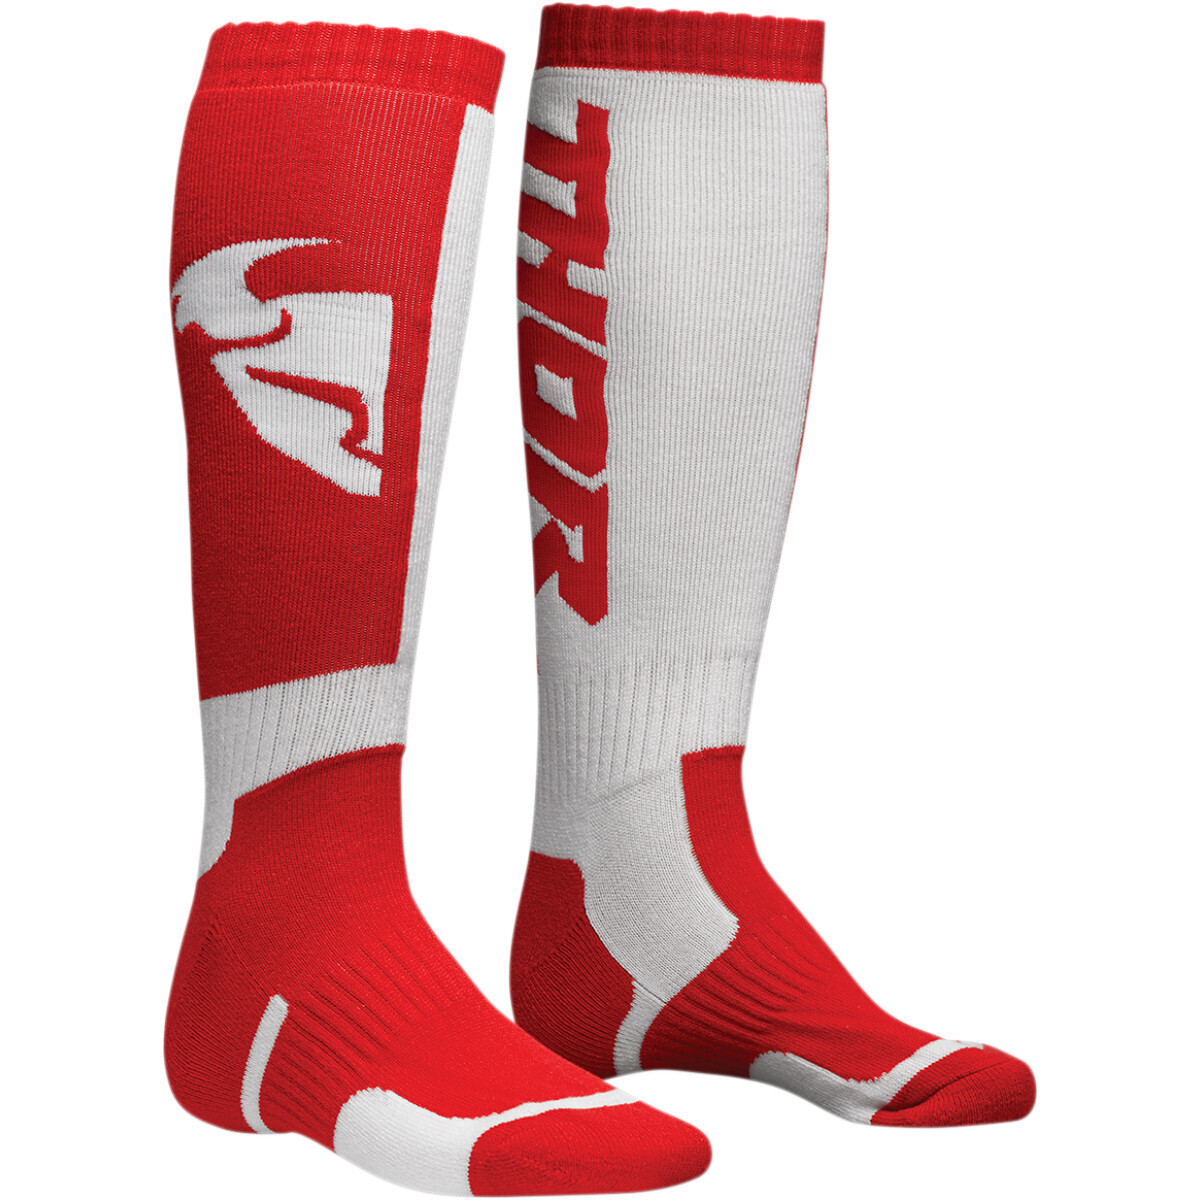 THOR
YOUTH MX S8Y SOCK RED/WHITE ONE SIZE 1-7 (EU32-39)